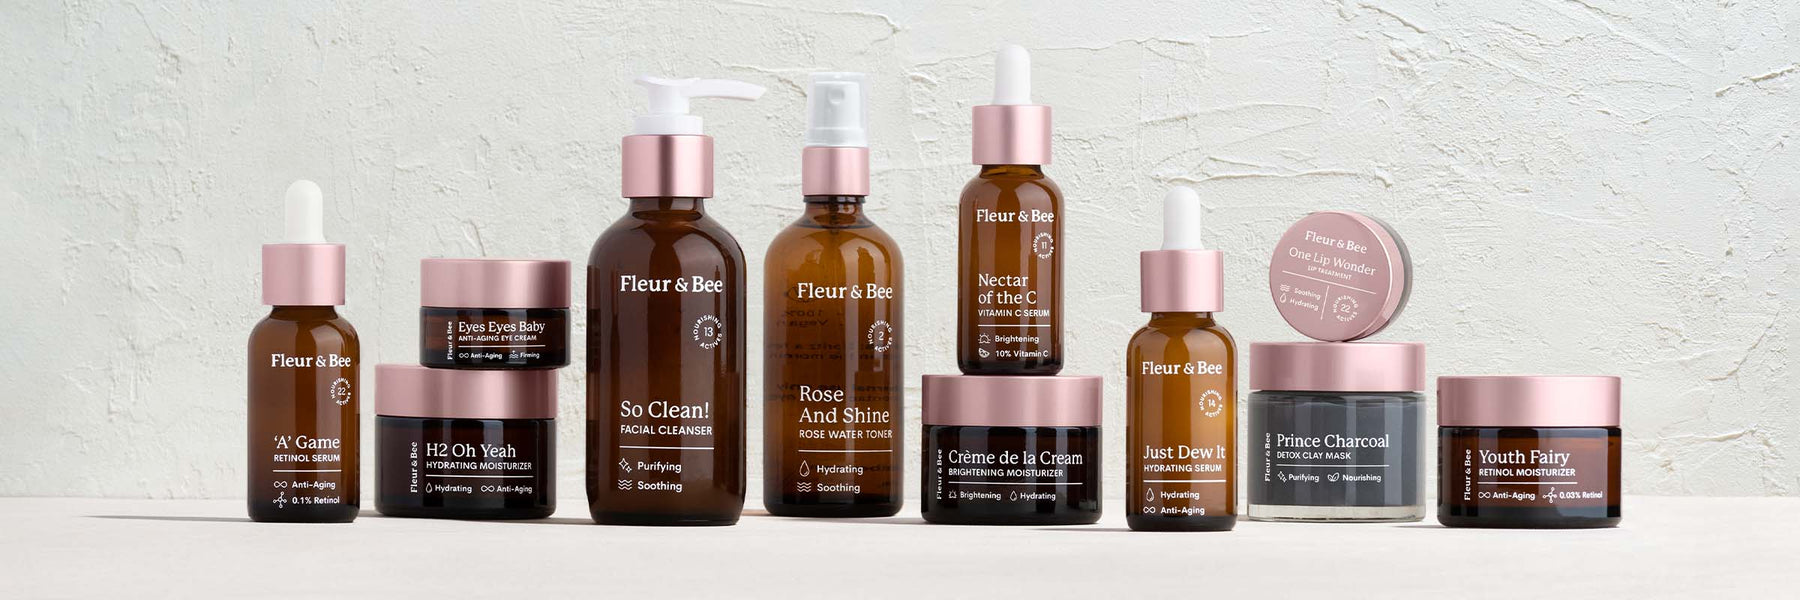 How to Use Fleur & Bee Skincare for the Best Results